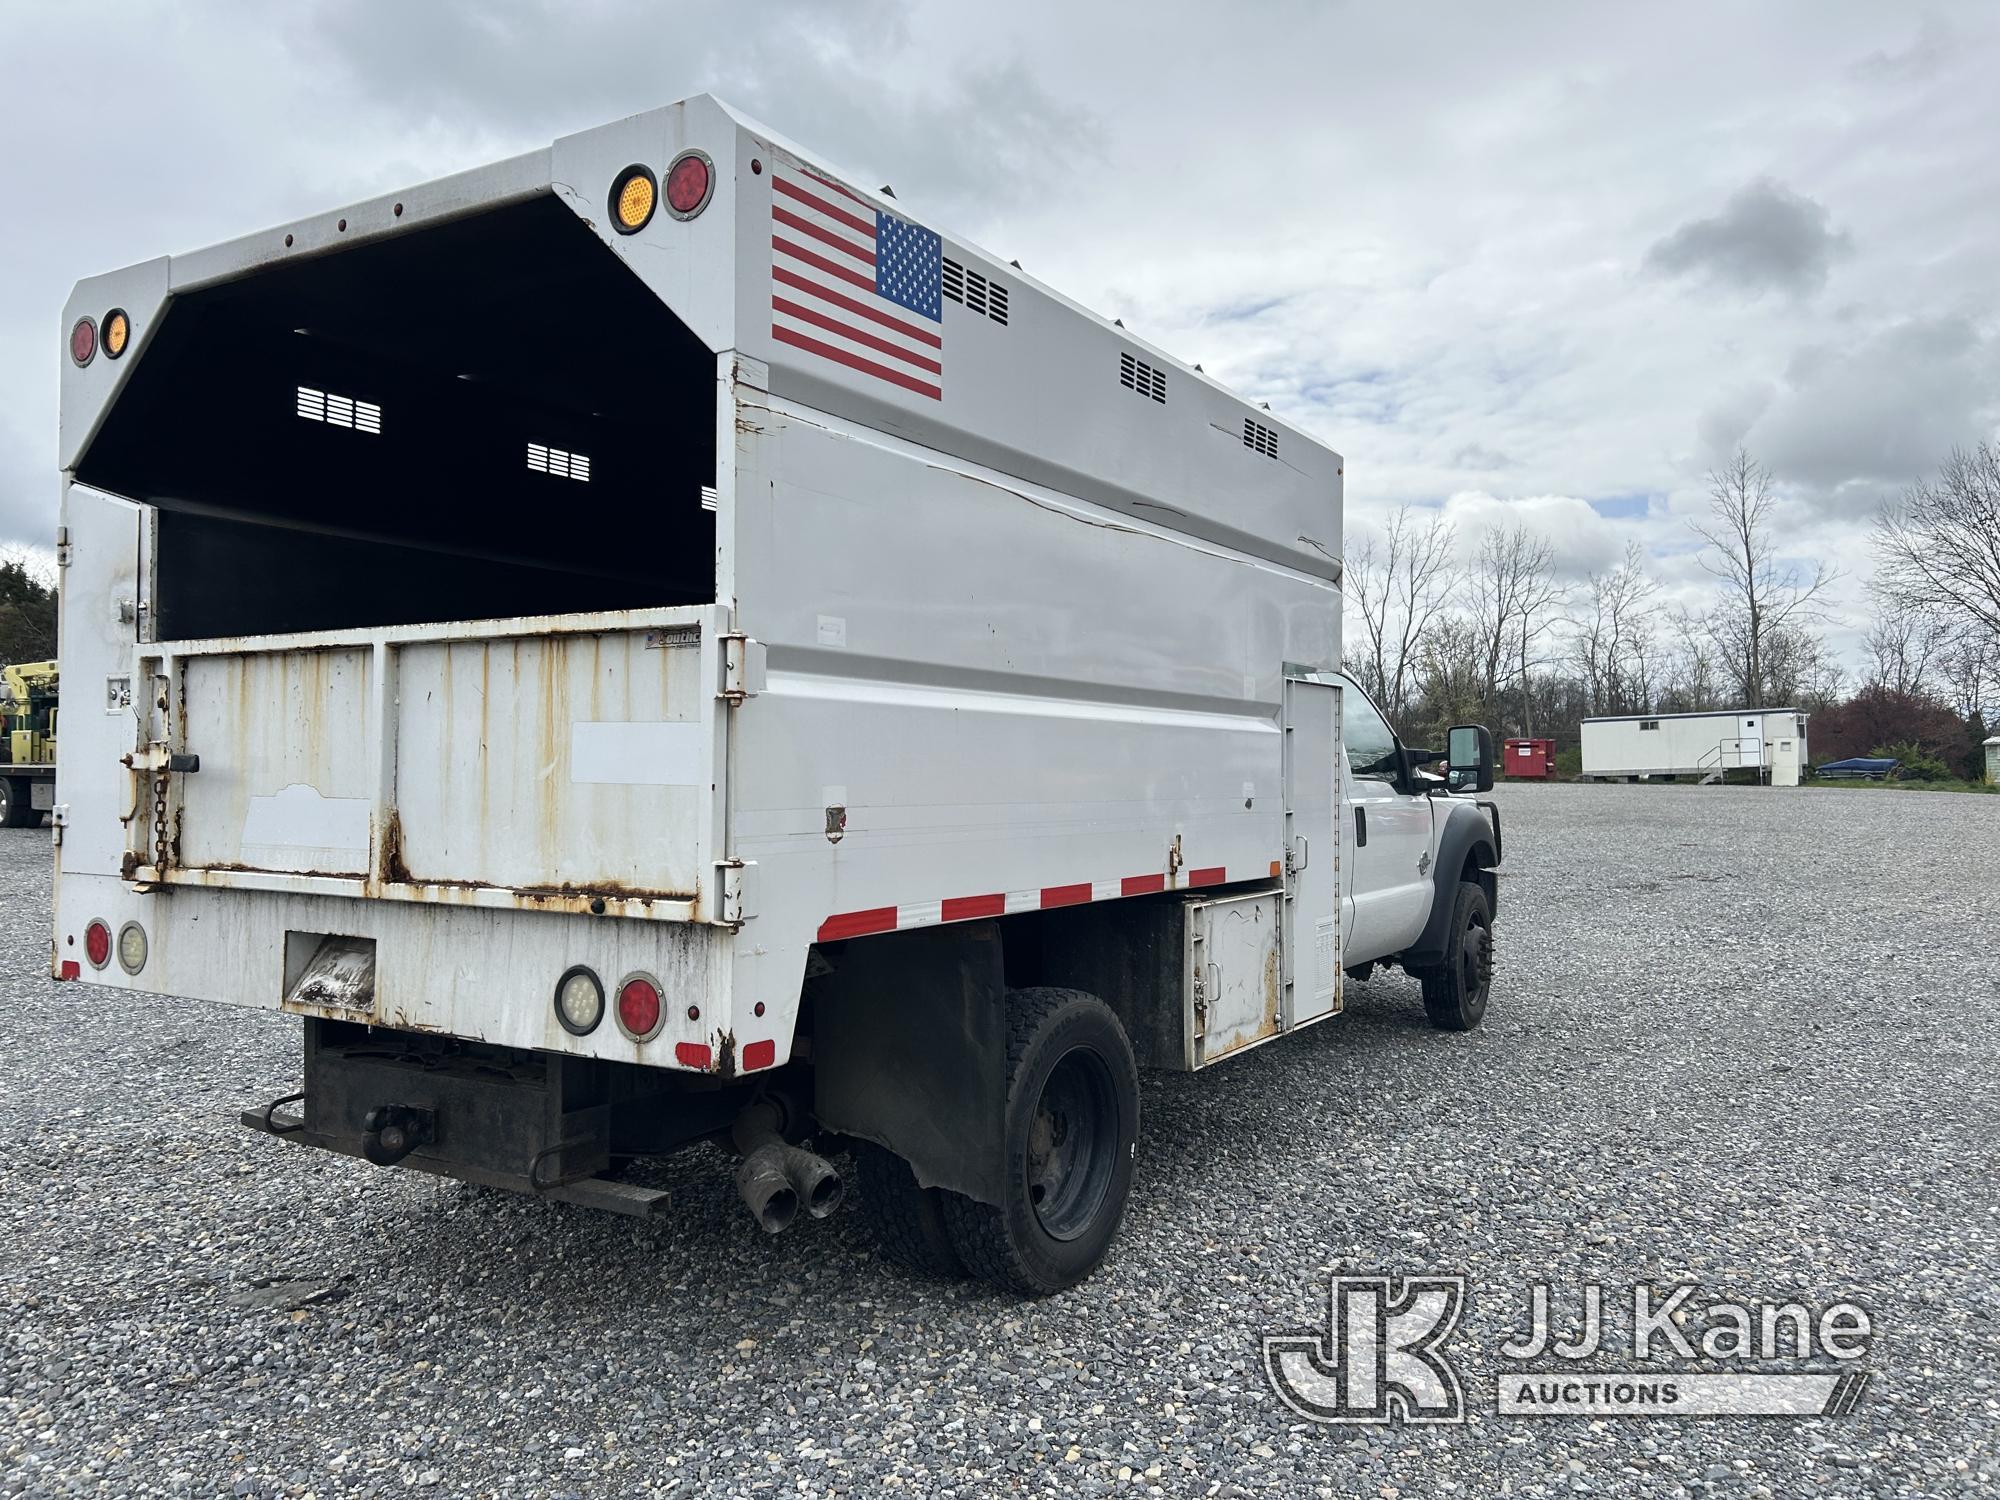 (Hagerstown, MD) 2015 Ford F550 4x4 Extended-Cab Chipper Dump Truck Runs & Moves, Dump Not Operating